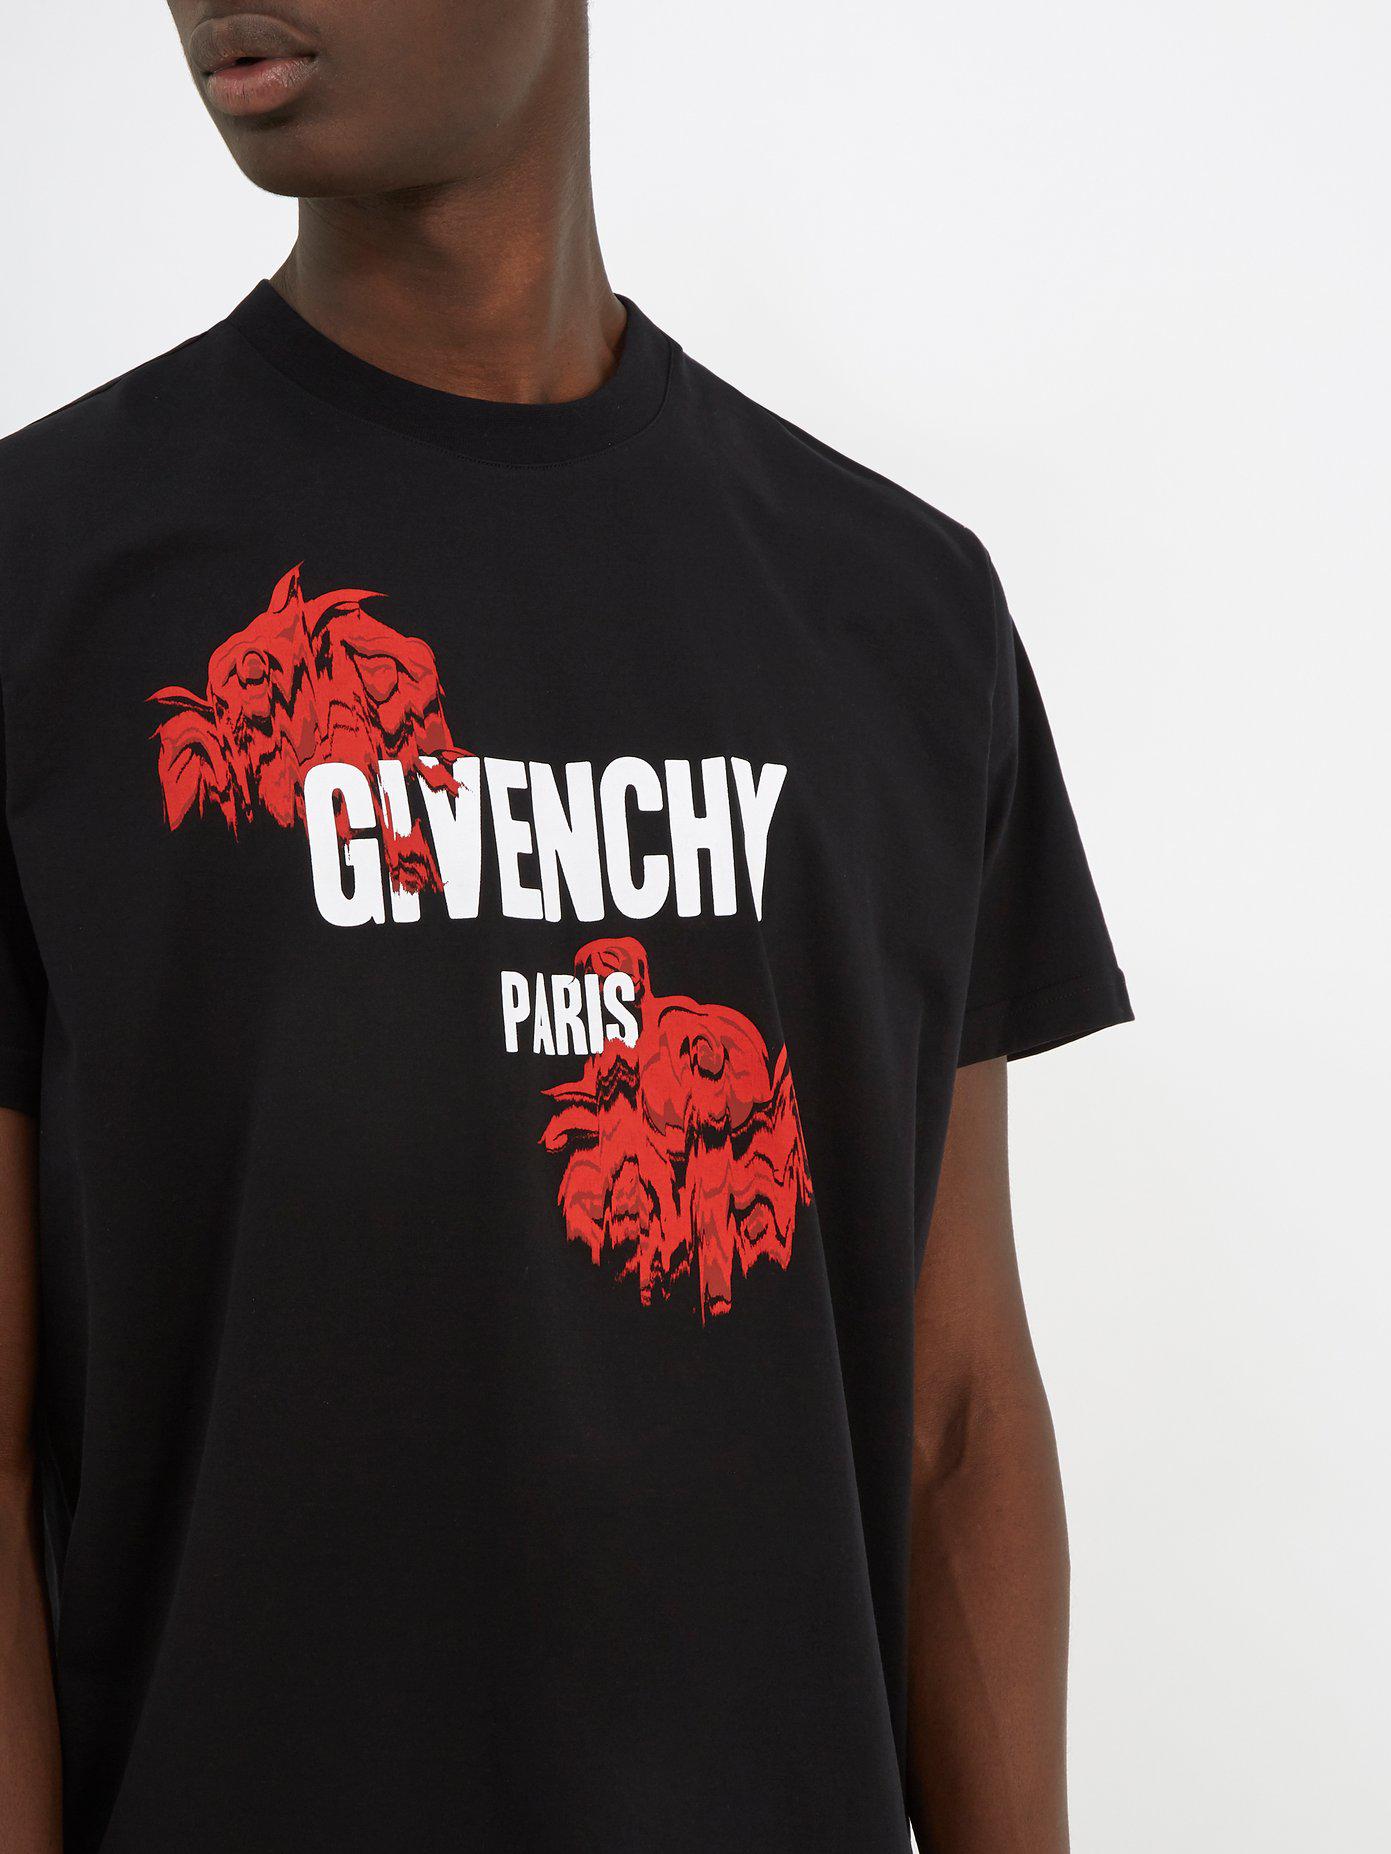 givenchy rose shirt off 53% - www 